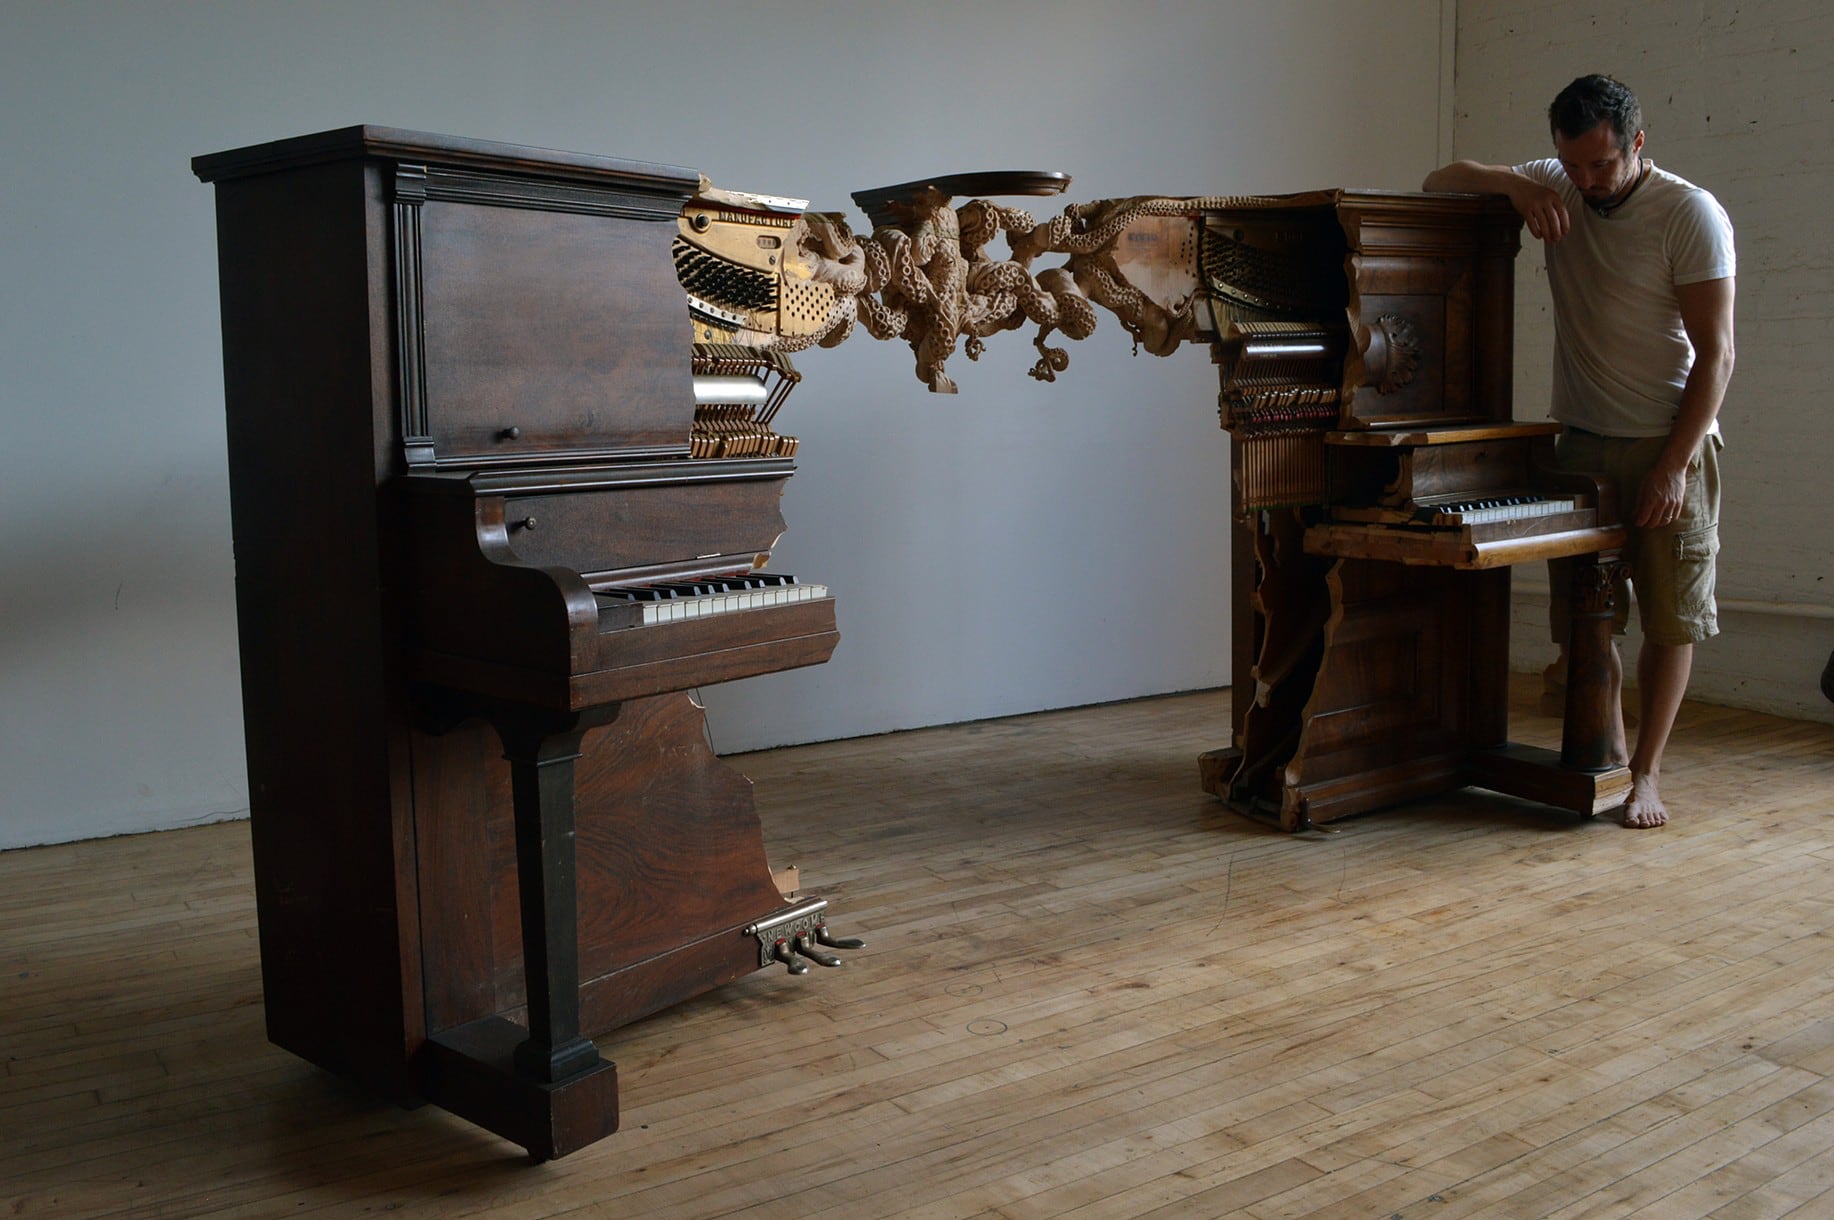 the artist rests his arm on a sculpture of two pianos sliced and connected by a carved knotted octopus